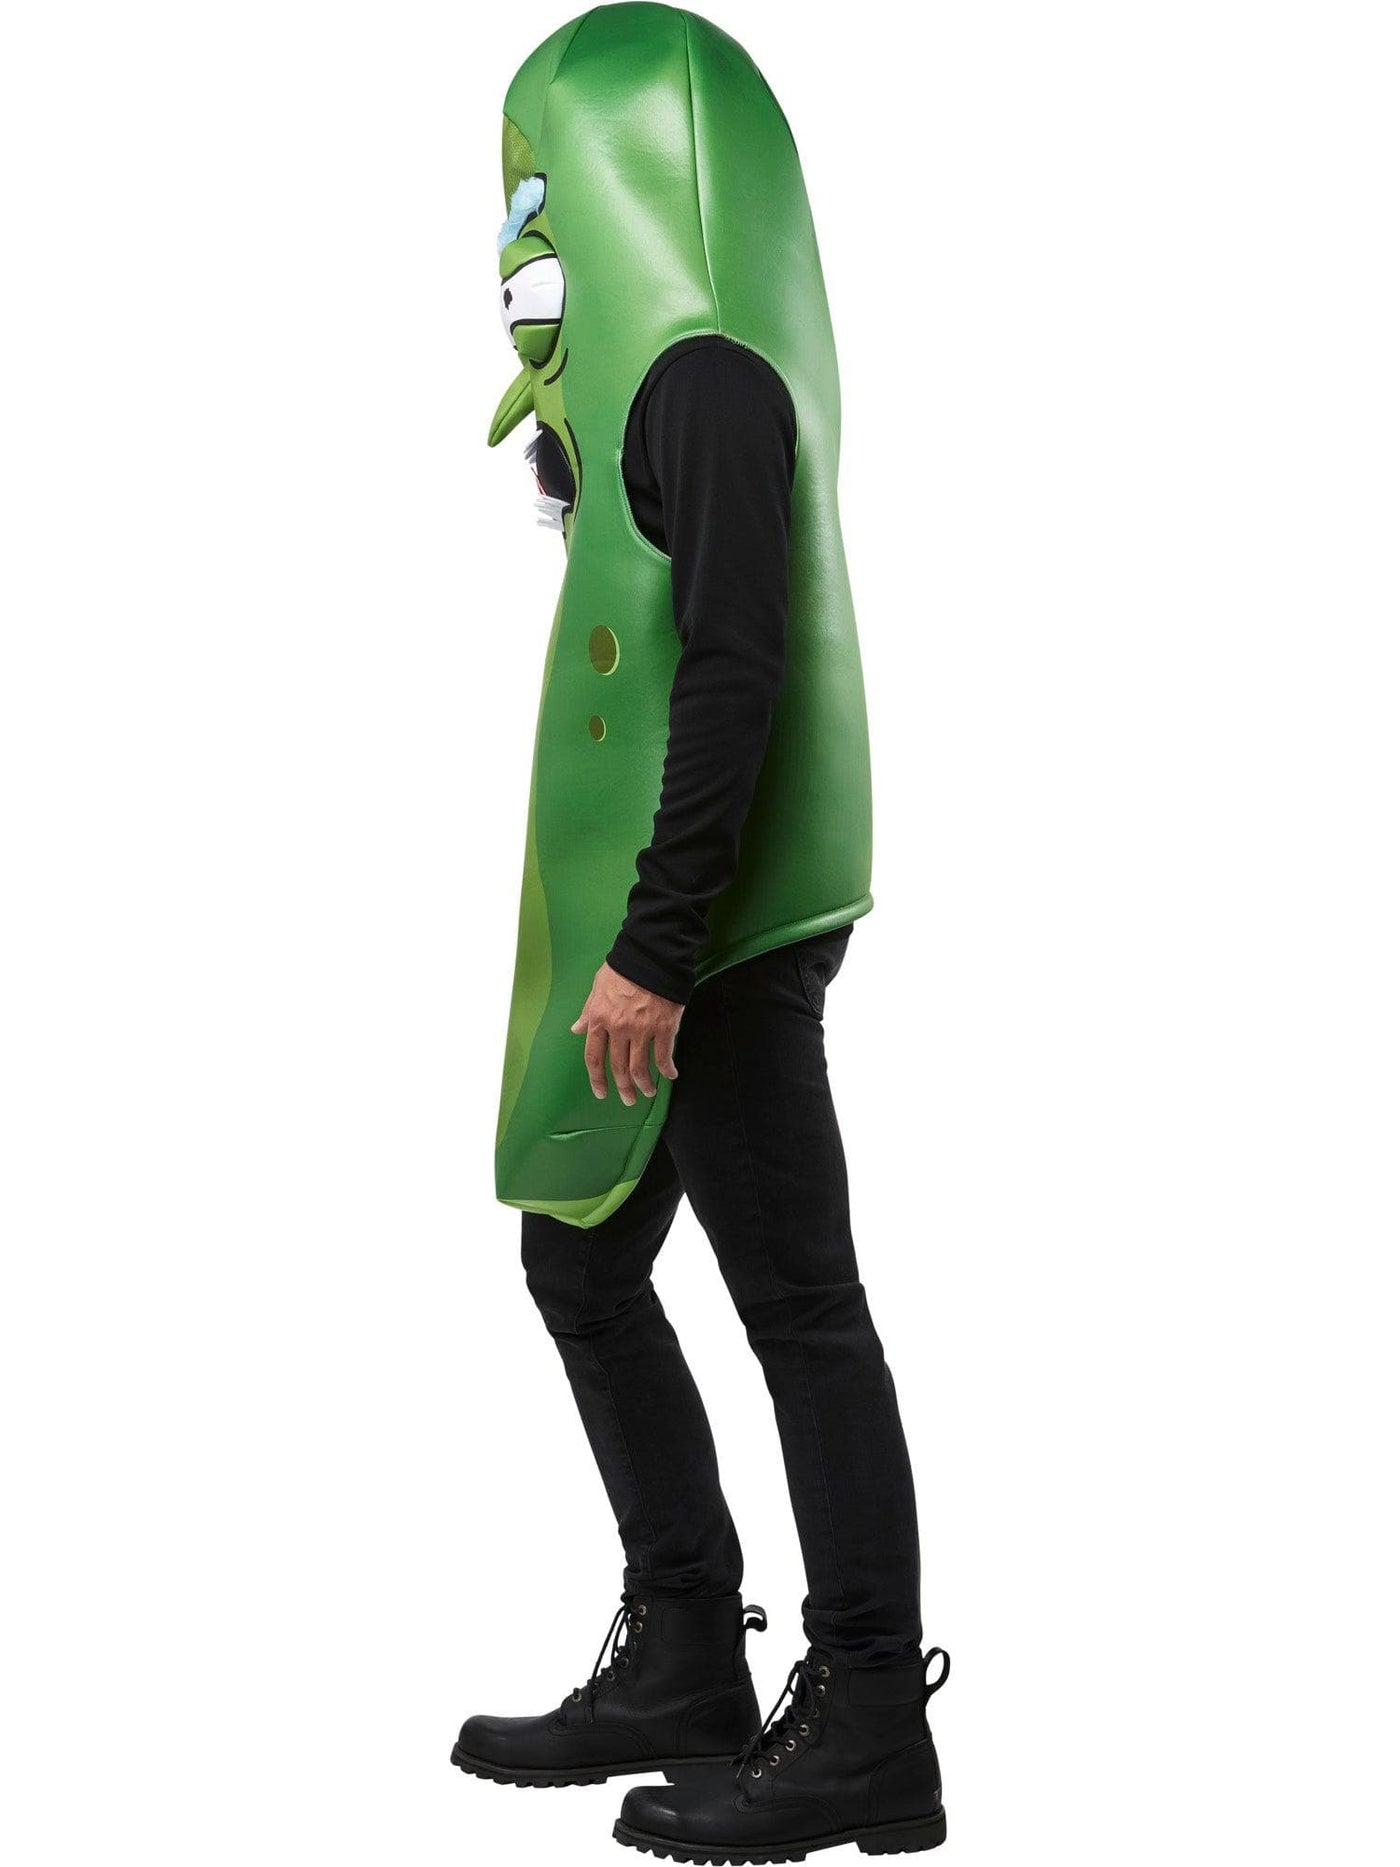 Rick and Morty Pickle Rick Adult Costume